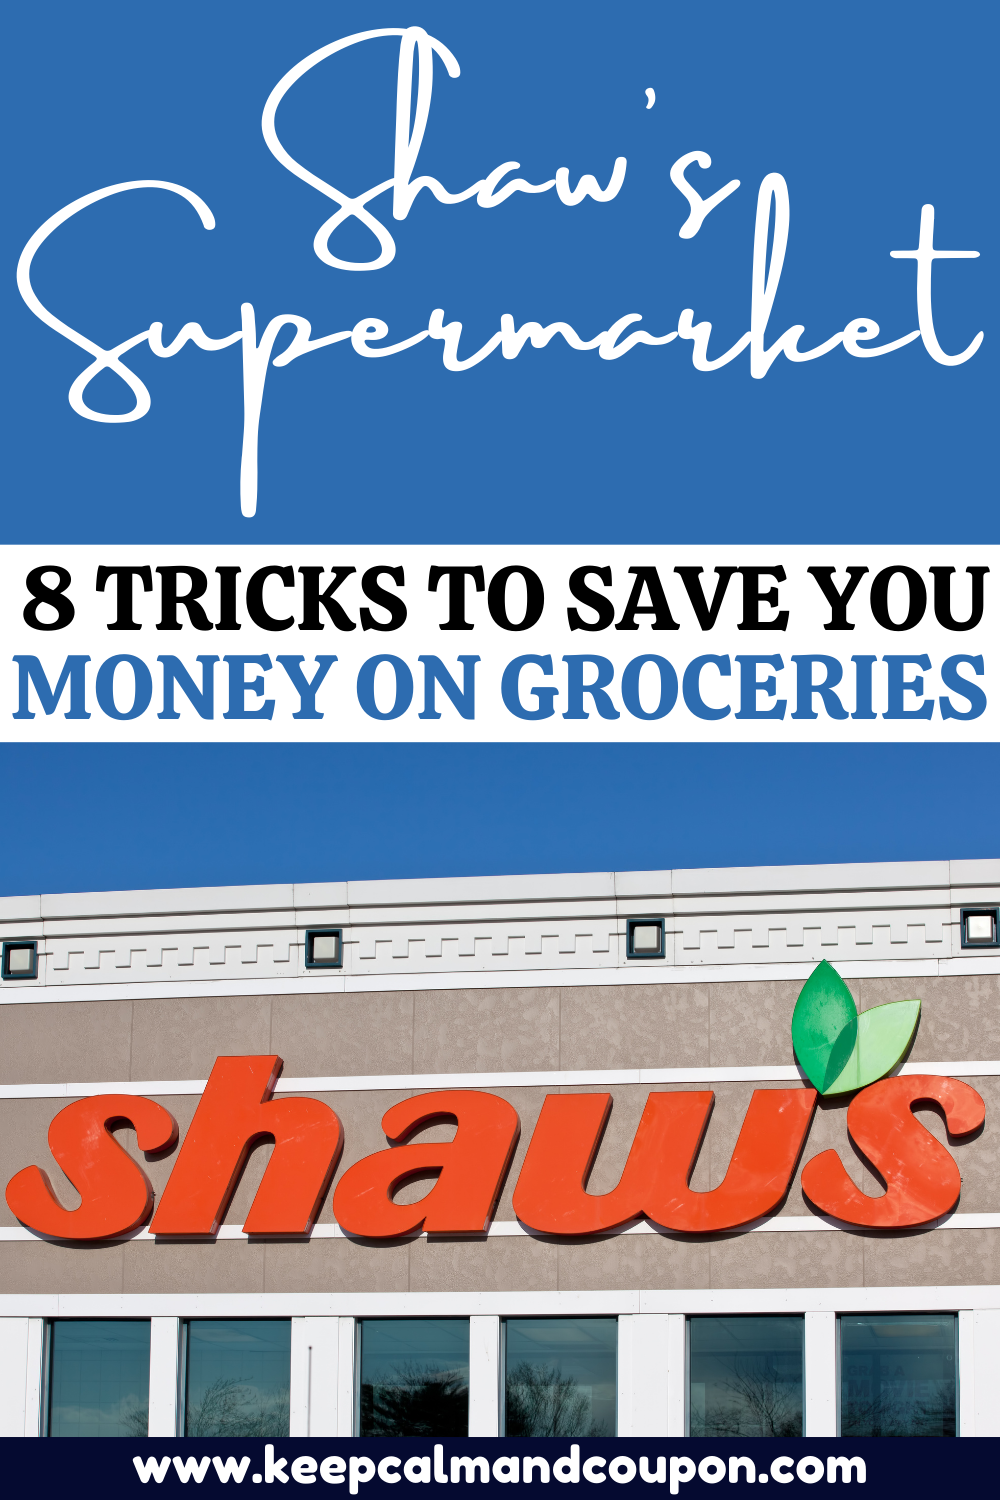 Shaw’s Supermarket - 8 Tricks to Save You Money on Groceries